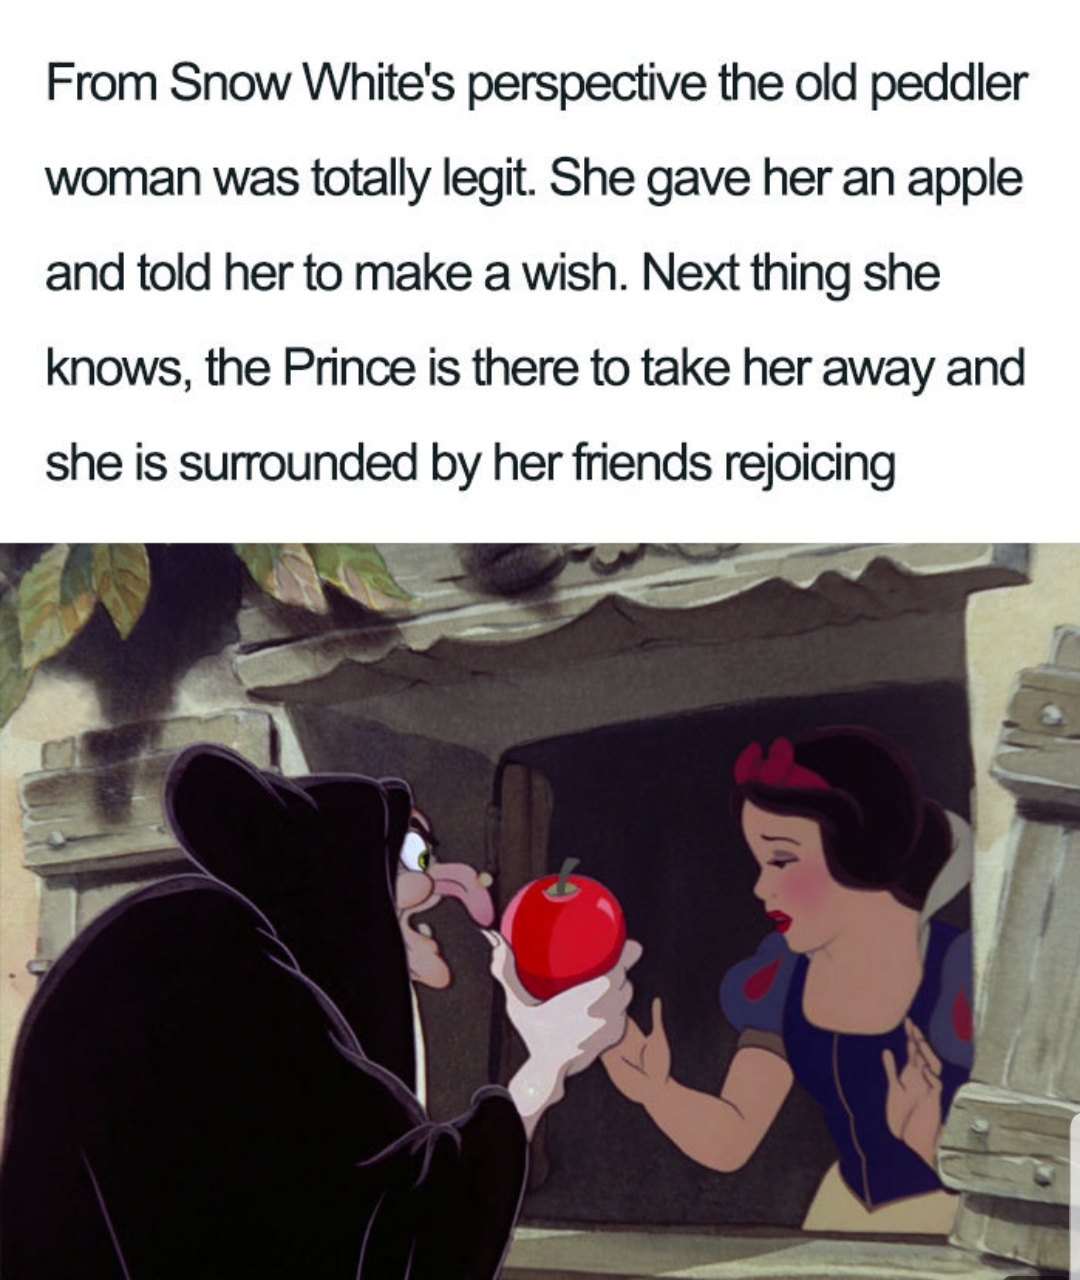 cartoon - From Snow White's perspective the old peddler woman was totally legit. She gave her an apple and told her to make a wish. Next thing she knows, the Prince is there to take her away and she is surrounded by her friends rejoicing